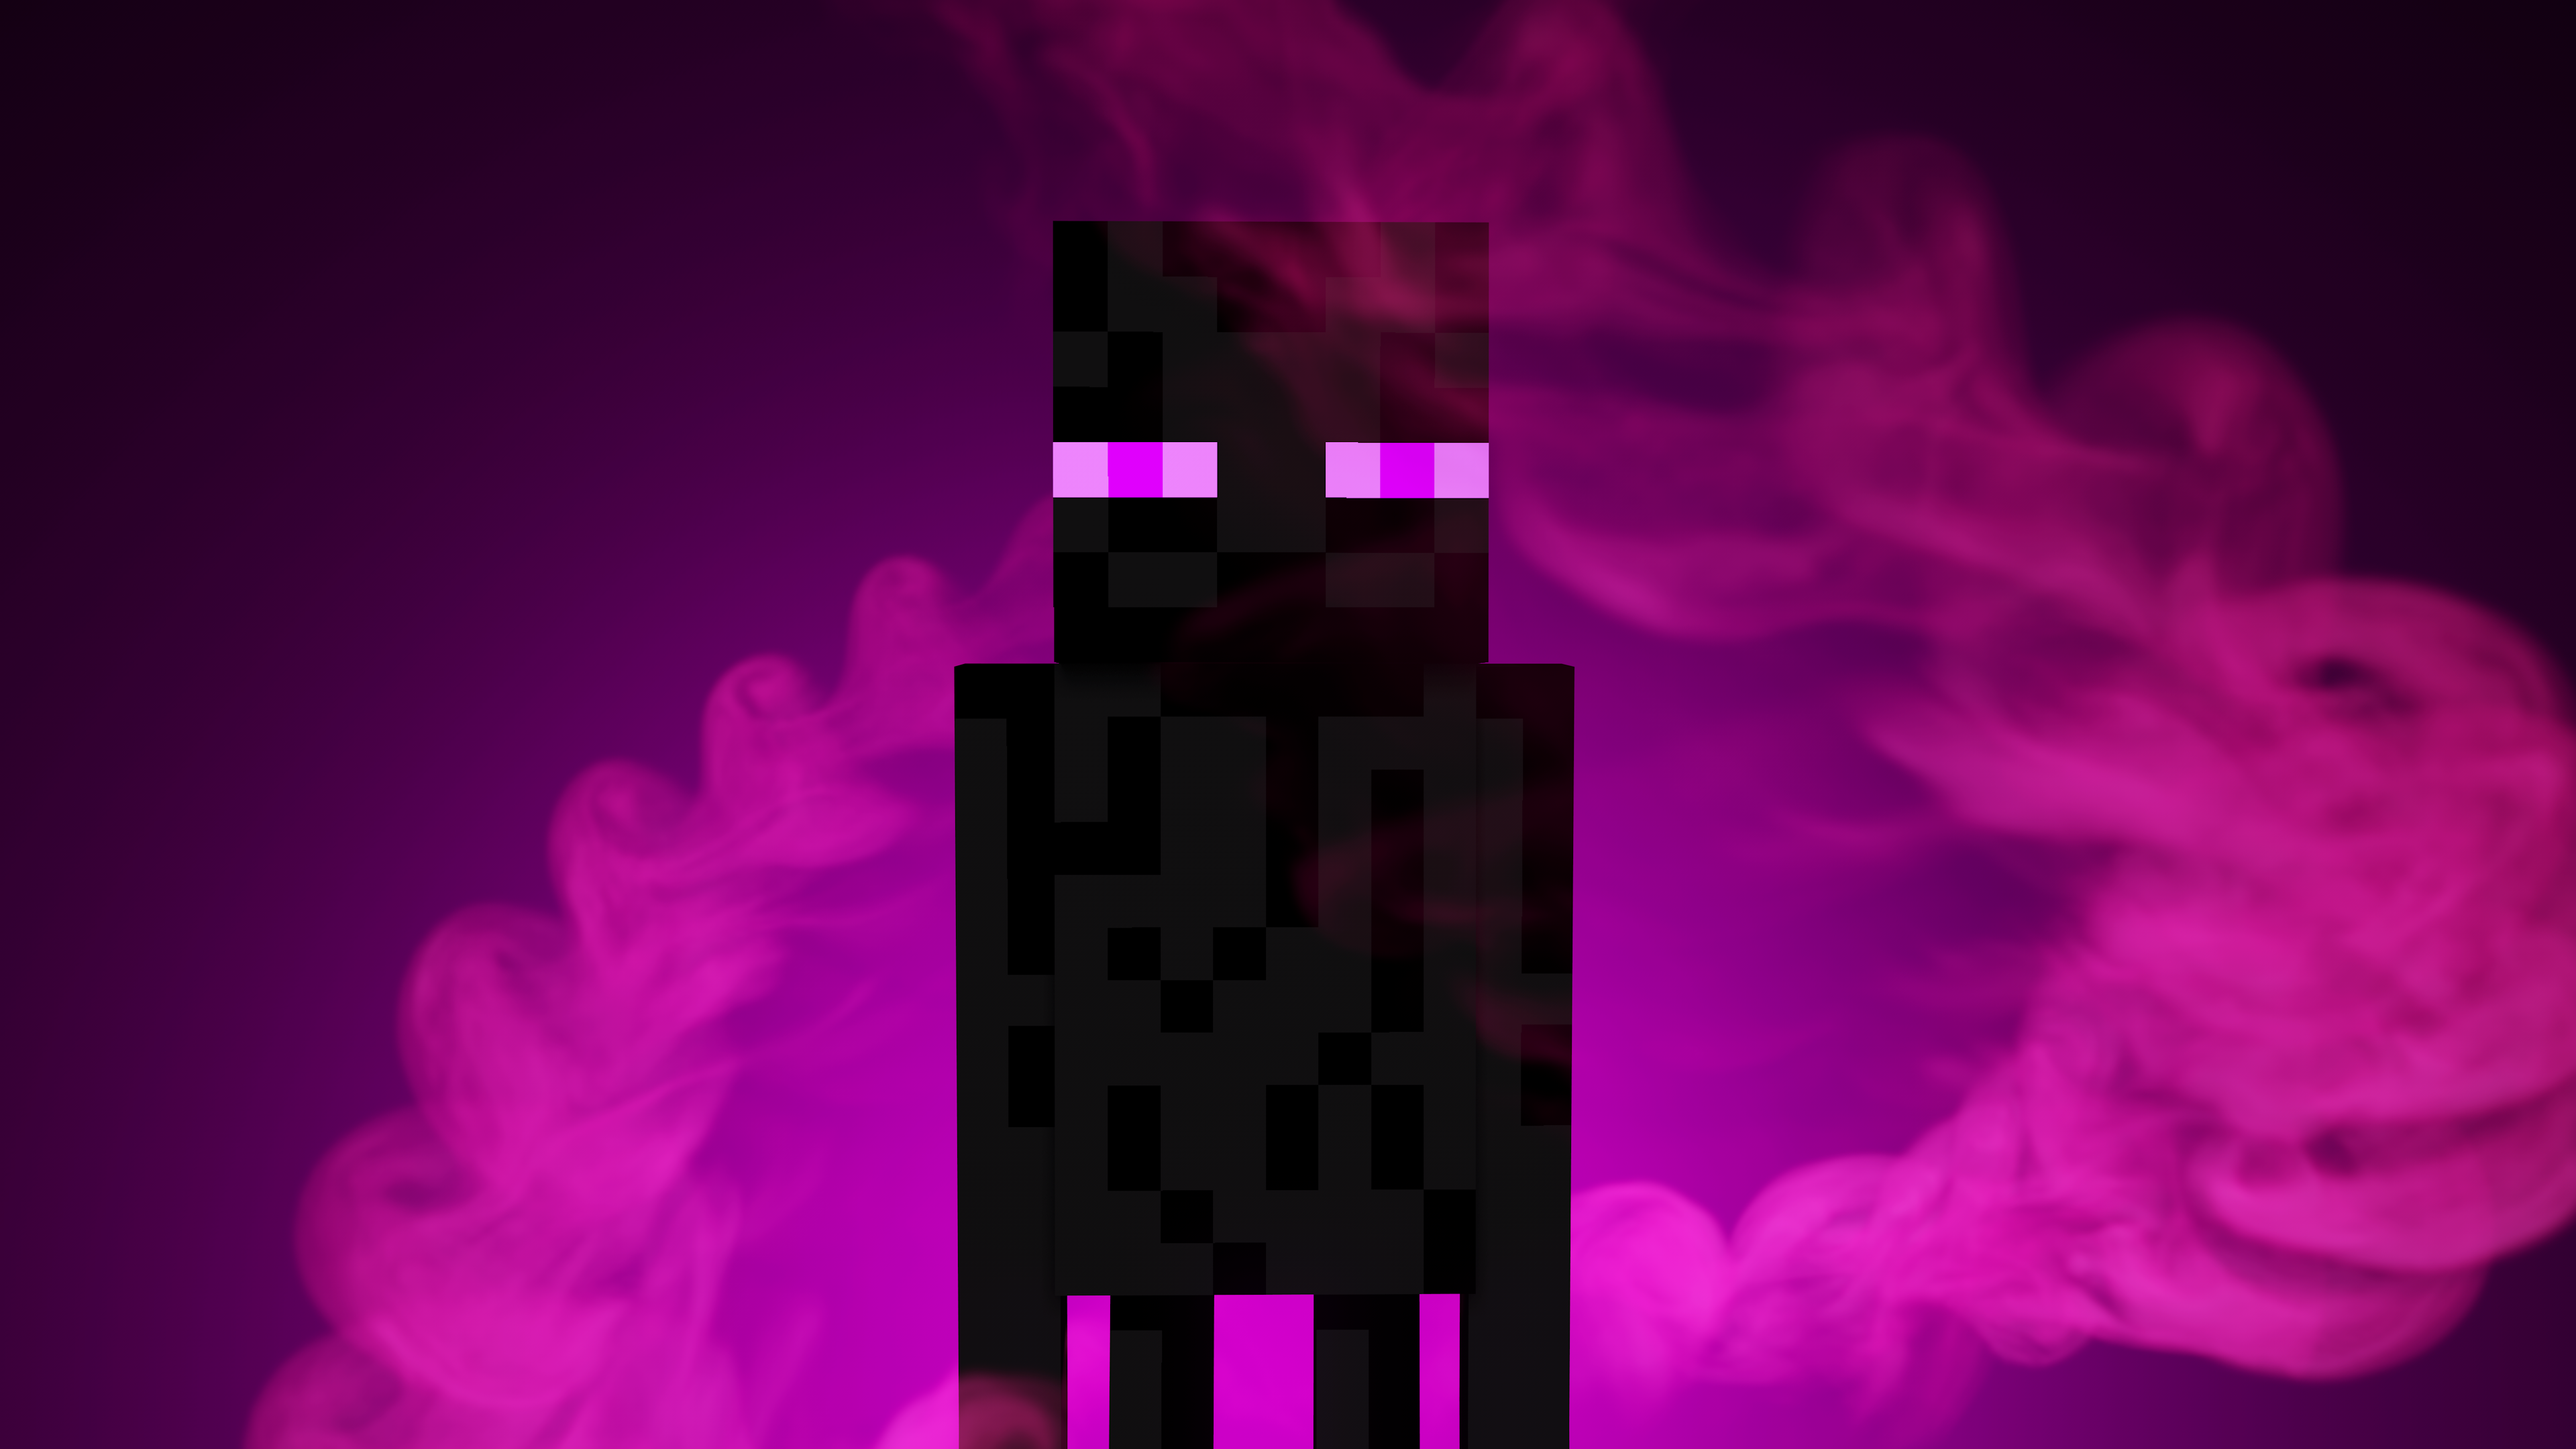 I Made This Enderman Background For Myself What Do You Think